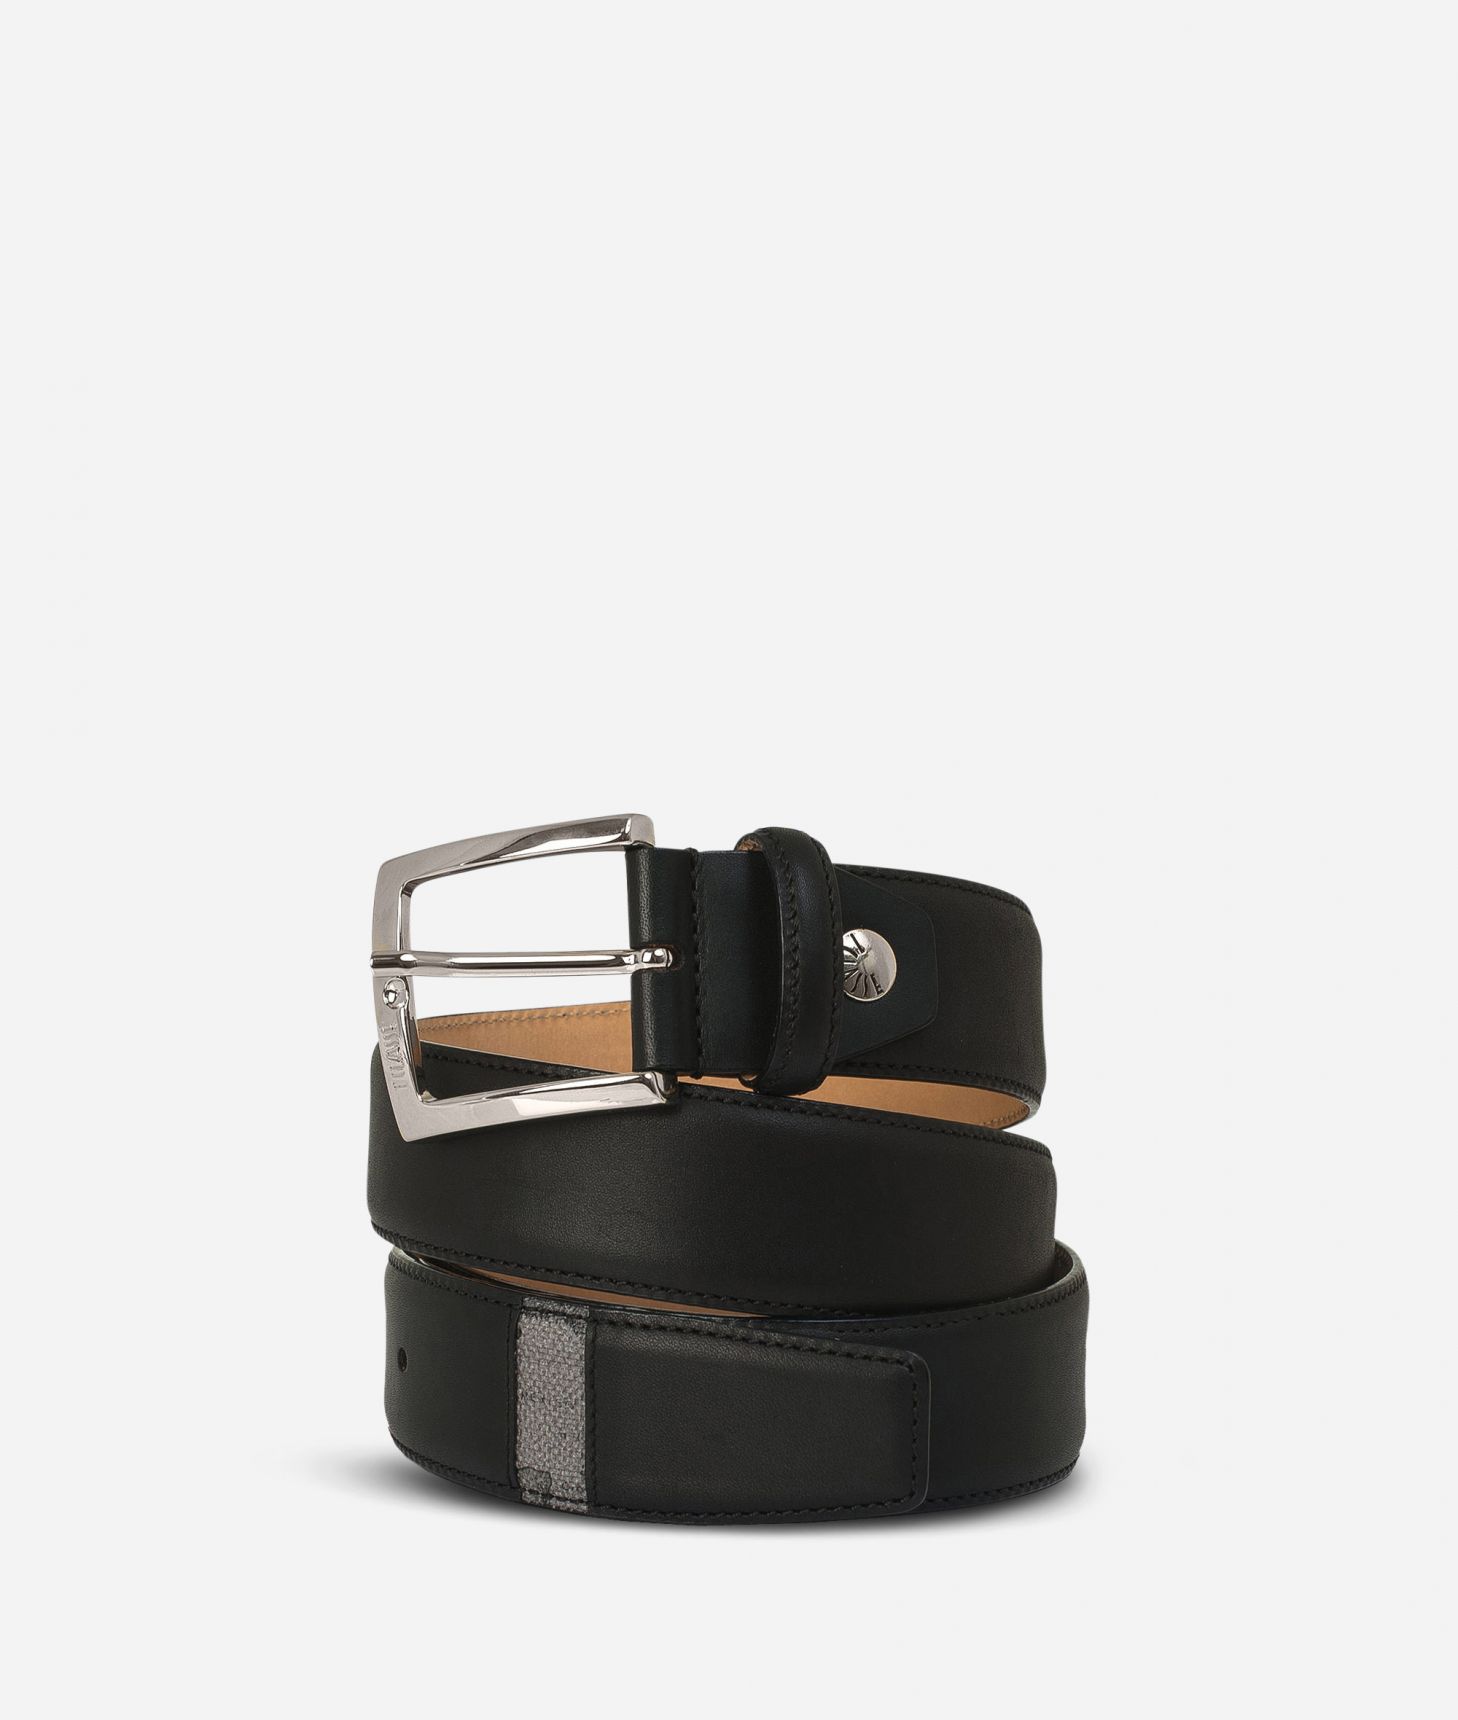 Leather belt trimmed in Geo Dark fabric,front